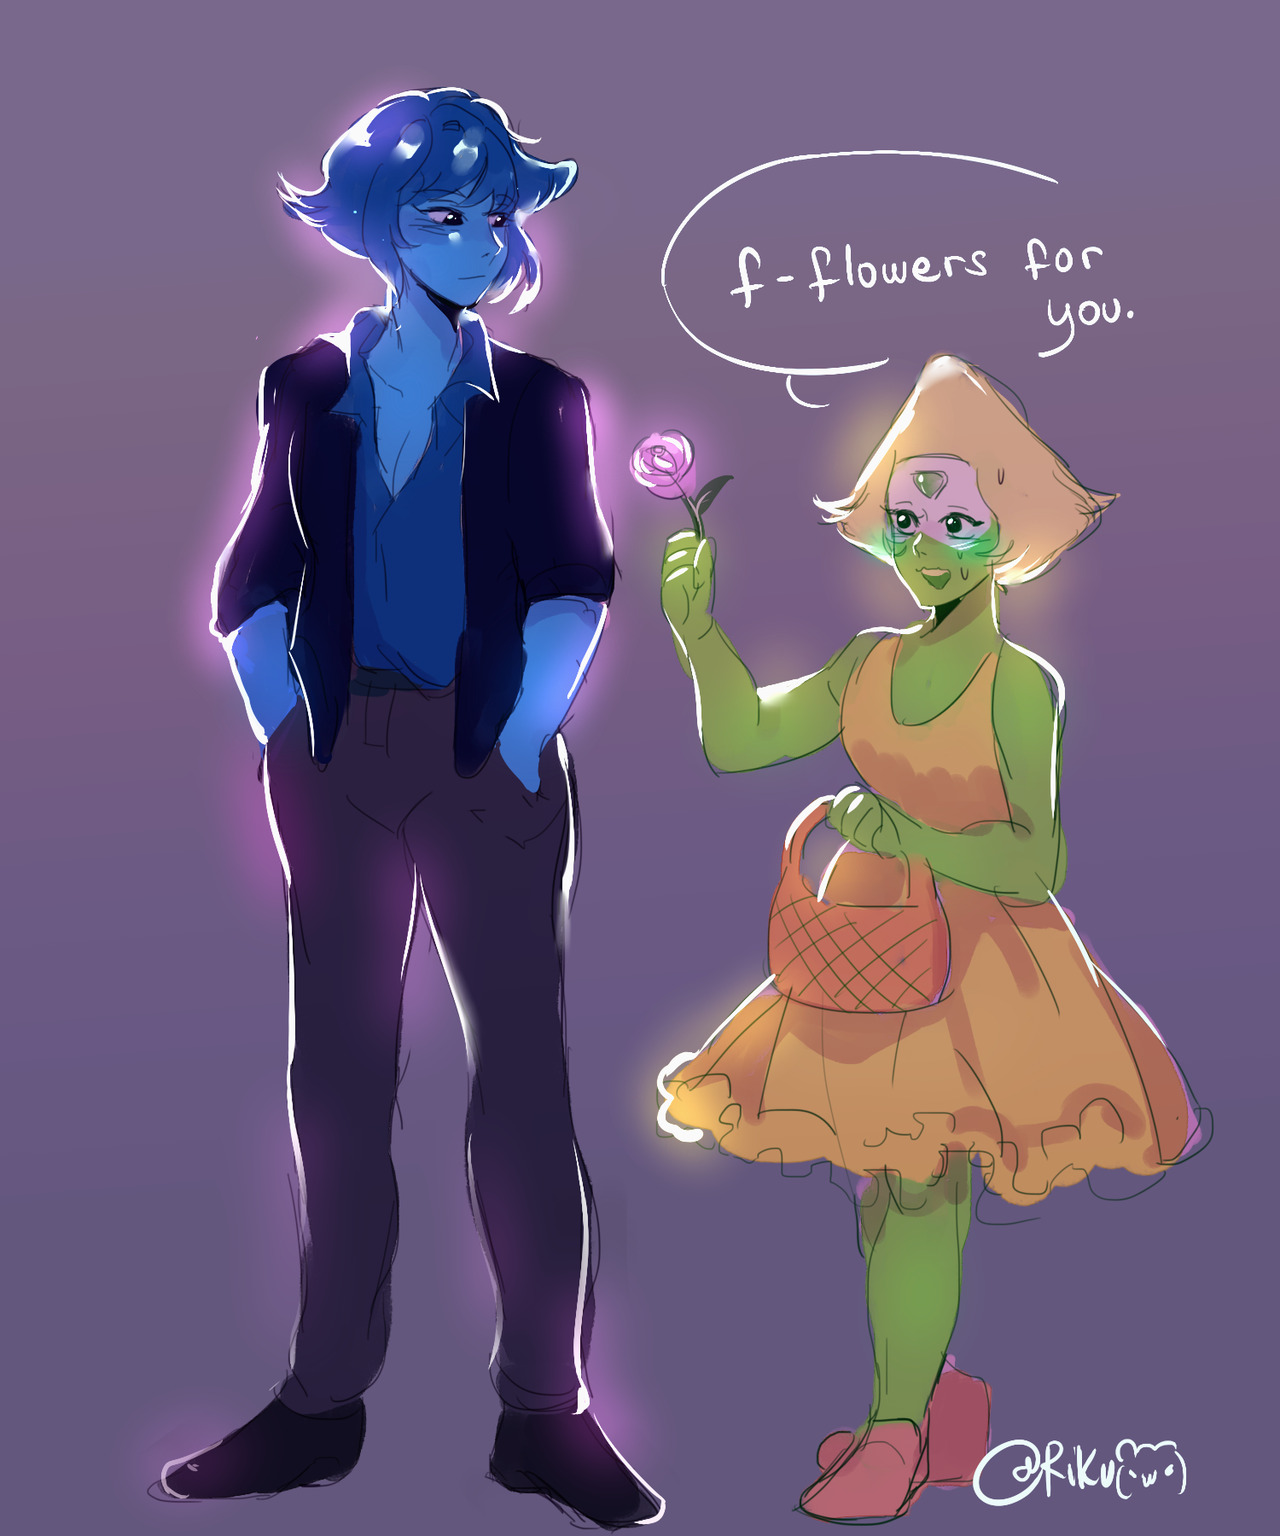 waidjwadjakldj just a thought of what lapis couldve wore in the wedding